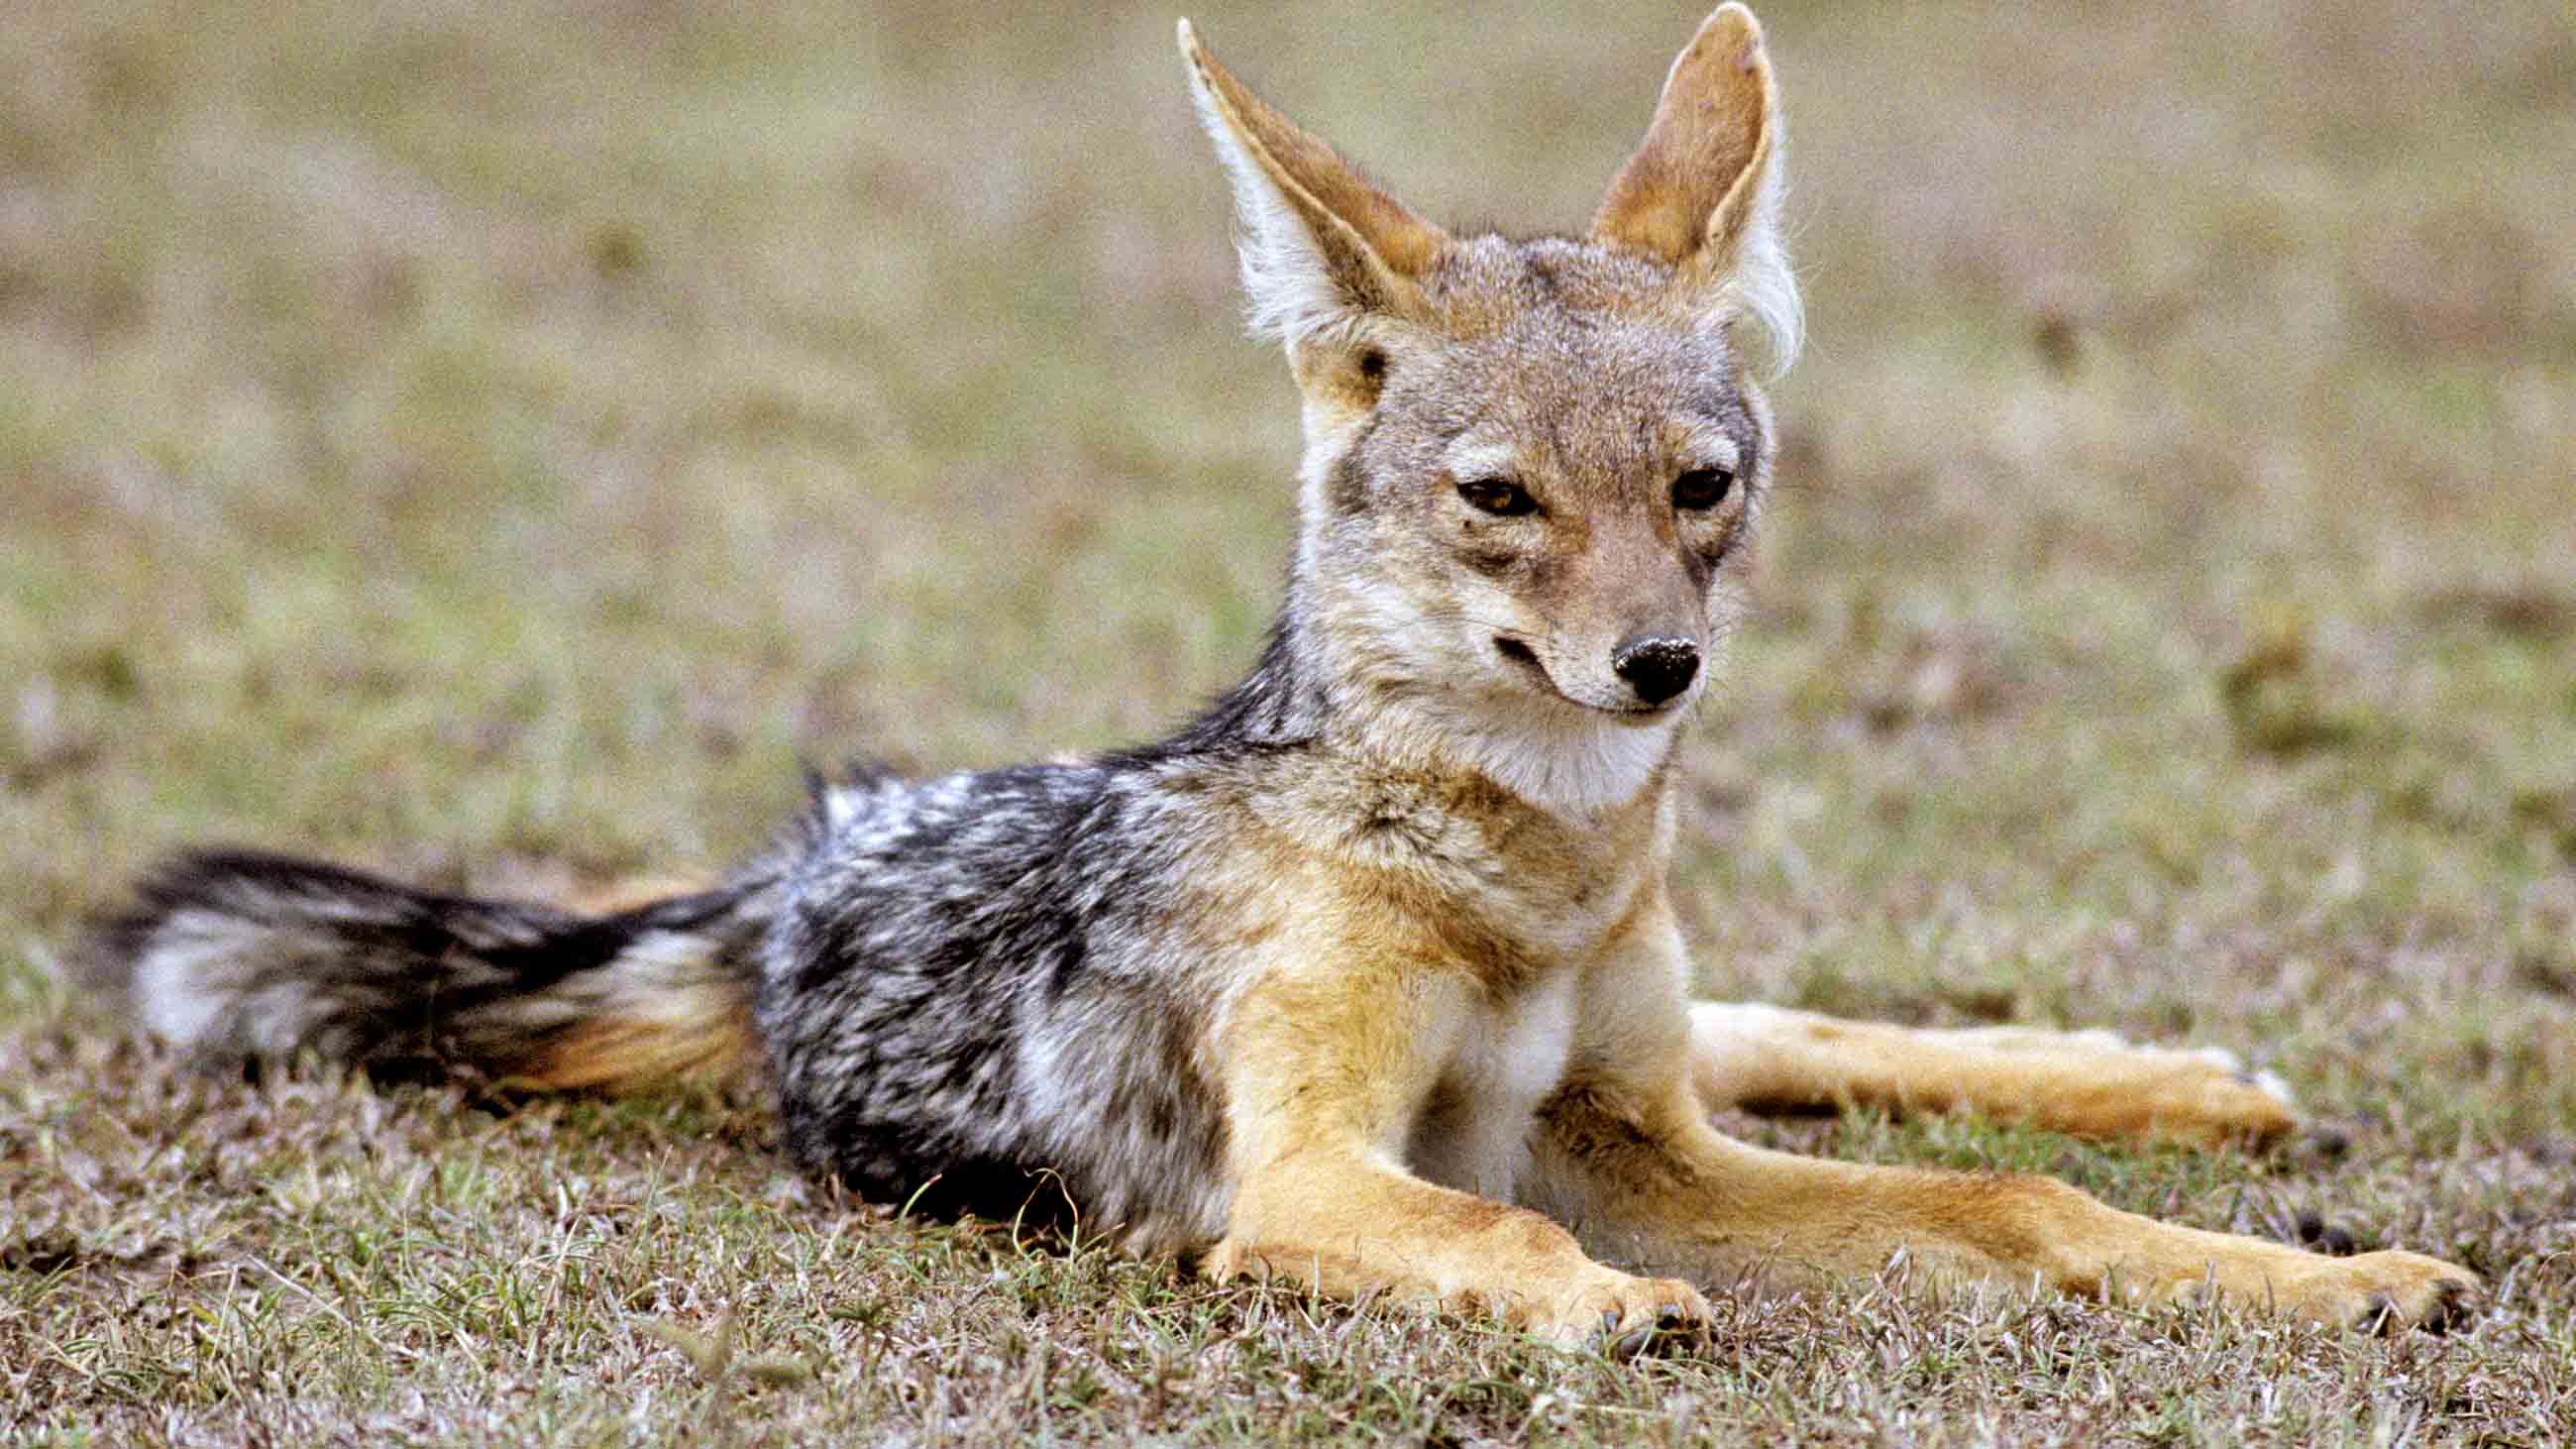 When I told /’Engn!au that my wildlife book said black-backed jackals could be vicious, he replied with great relish, “Jackals do not read or write books.”